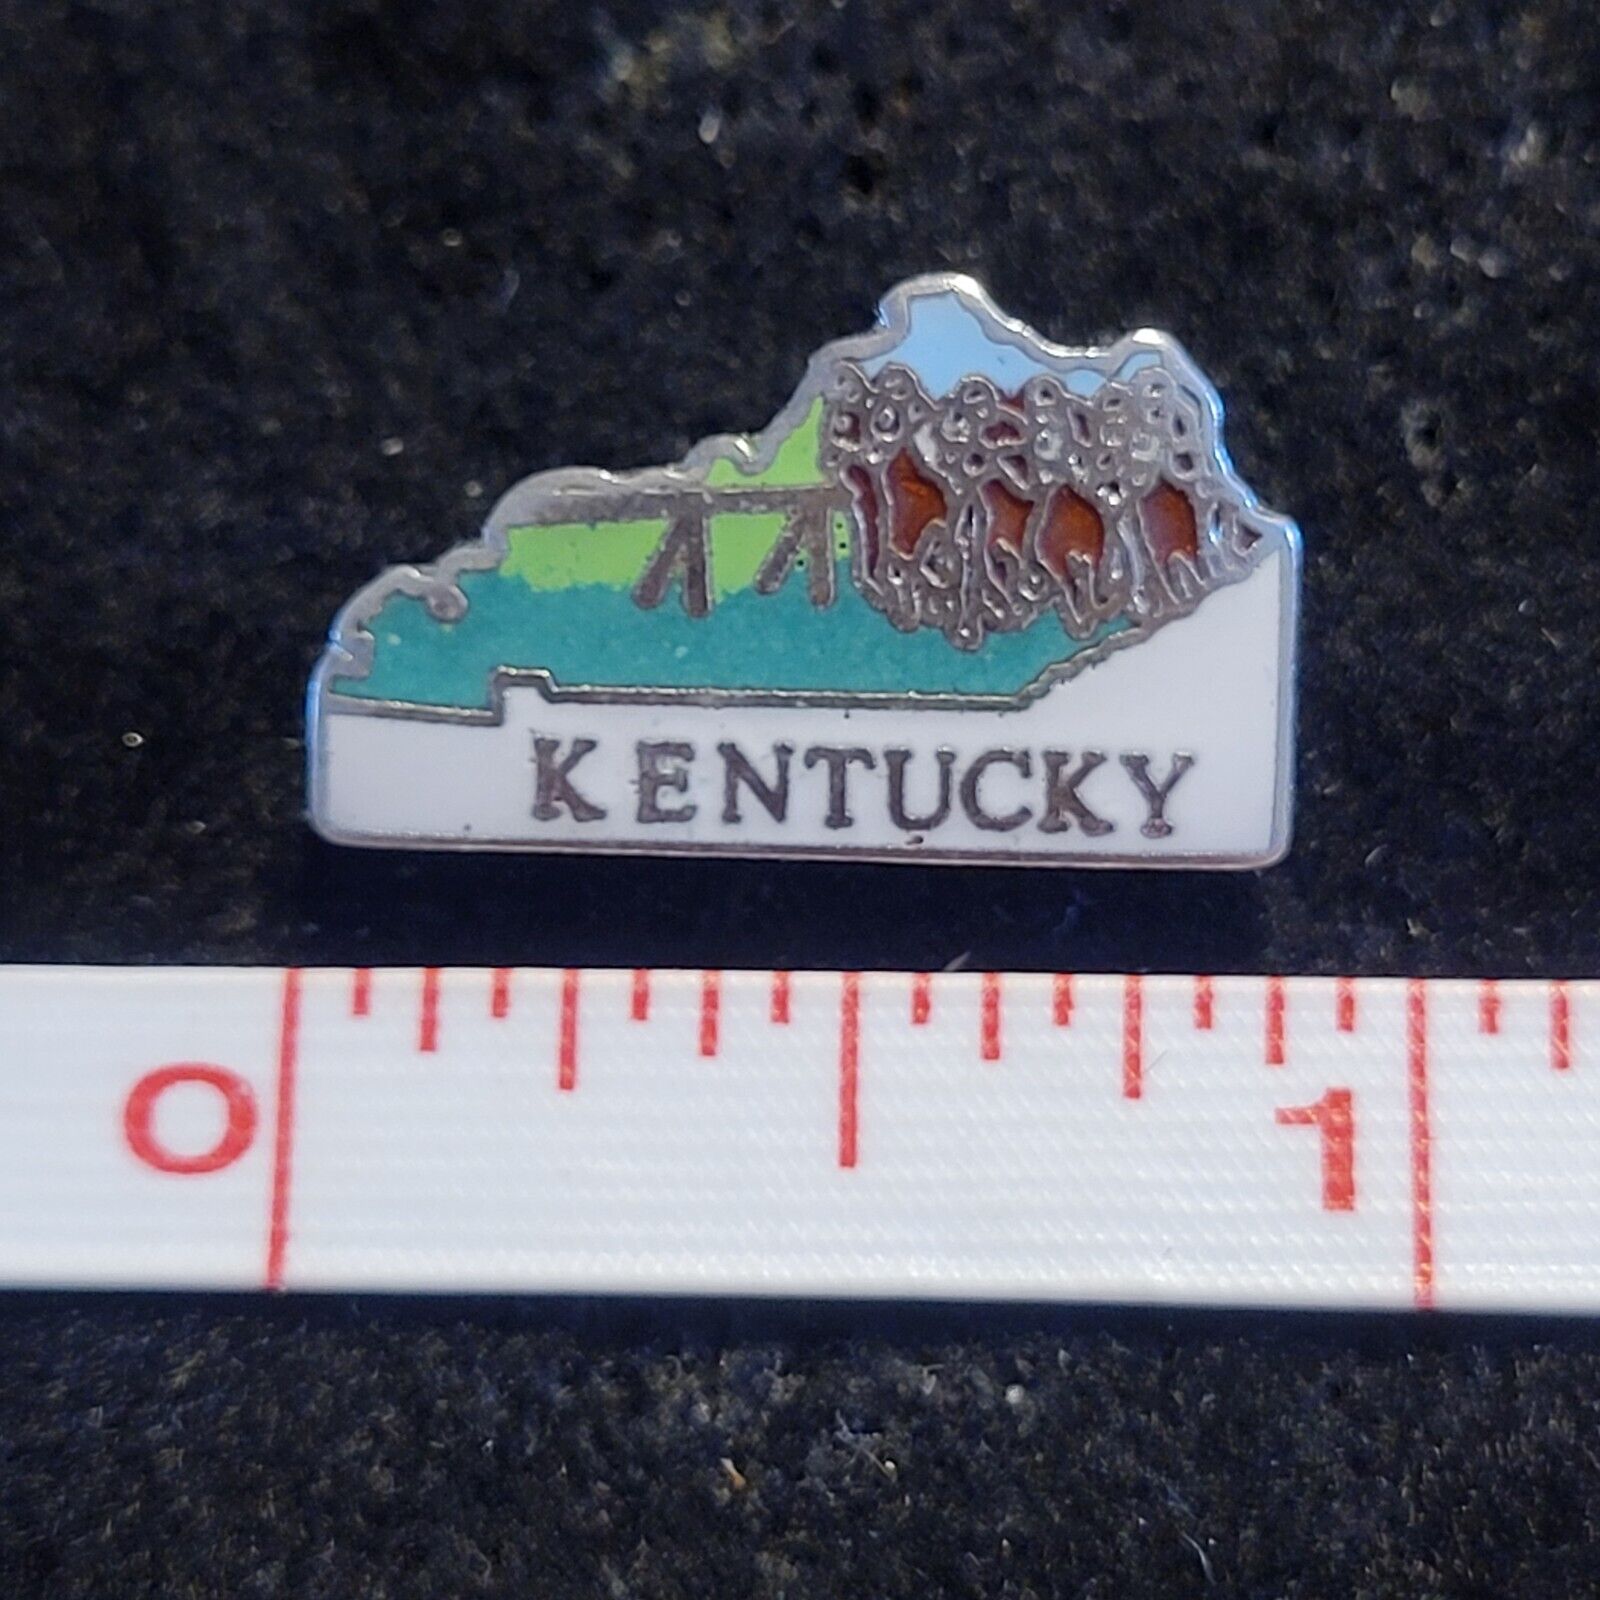 Kentucky KY Souvenir State Lapel Pin Hat Vest Tie Tack silver tone Mafco racing